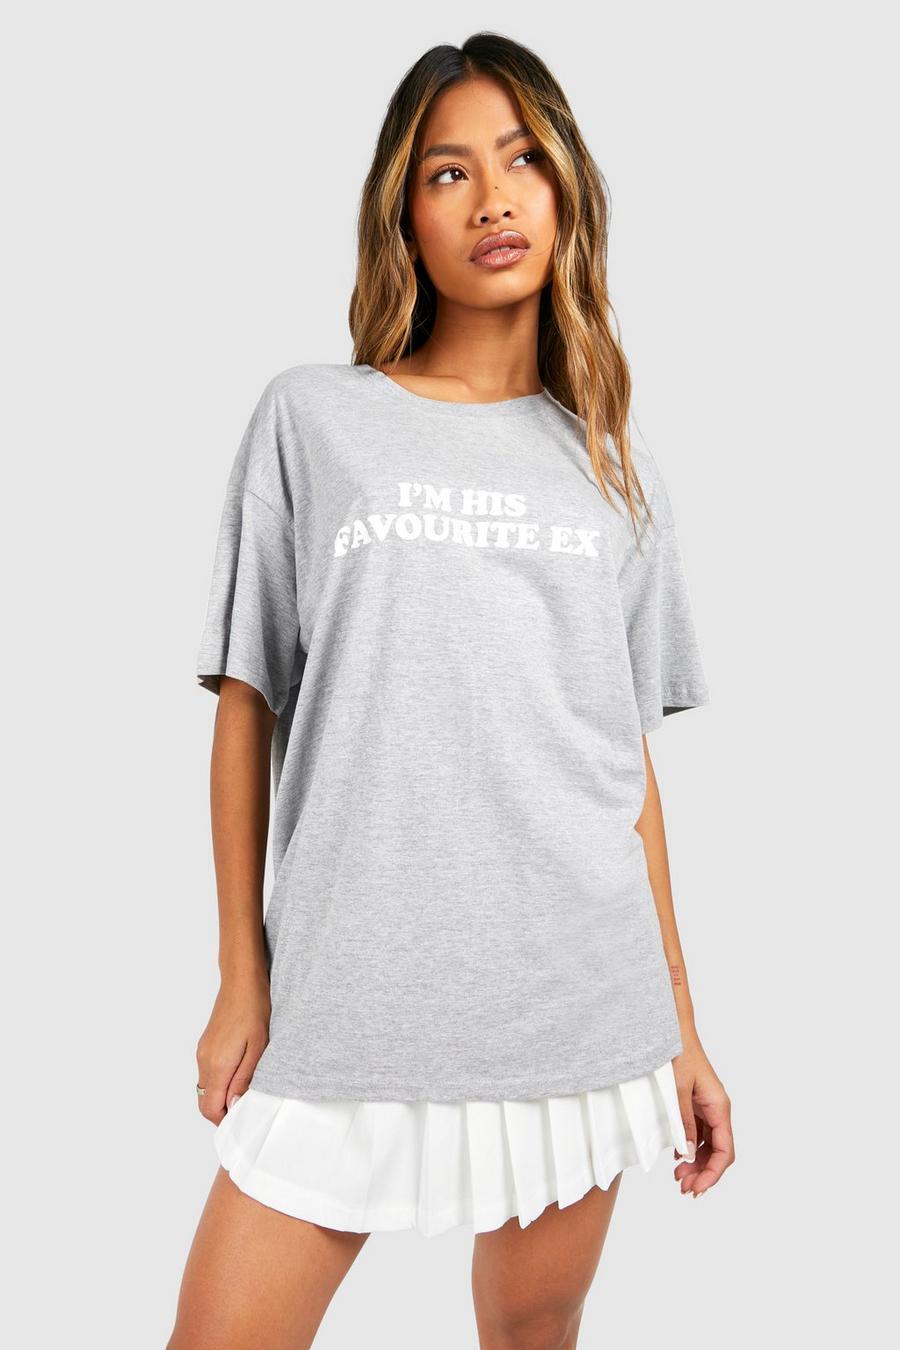 Oversize Baumwoll T-Shirt mit I‘m His Favourite Print, Grey image number 1